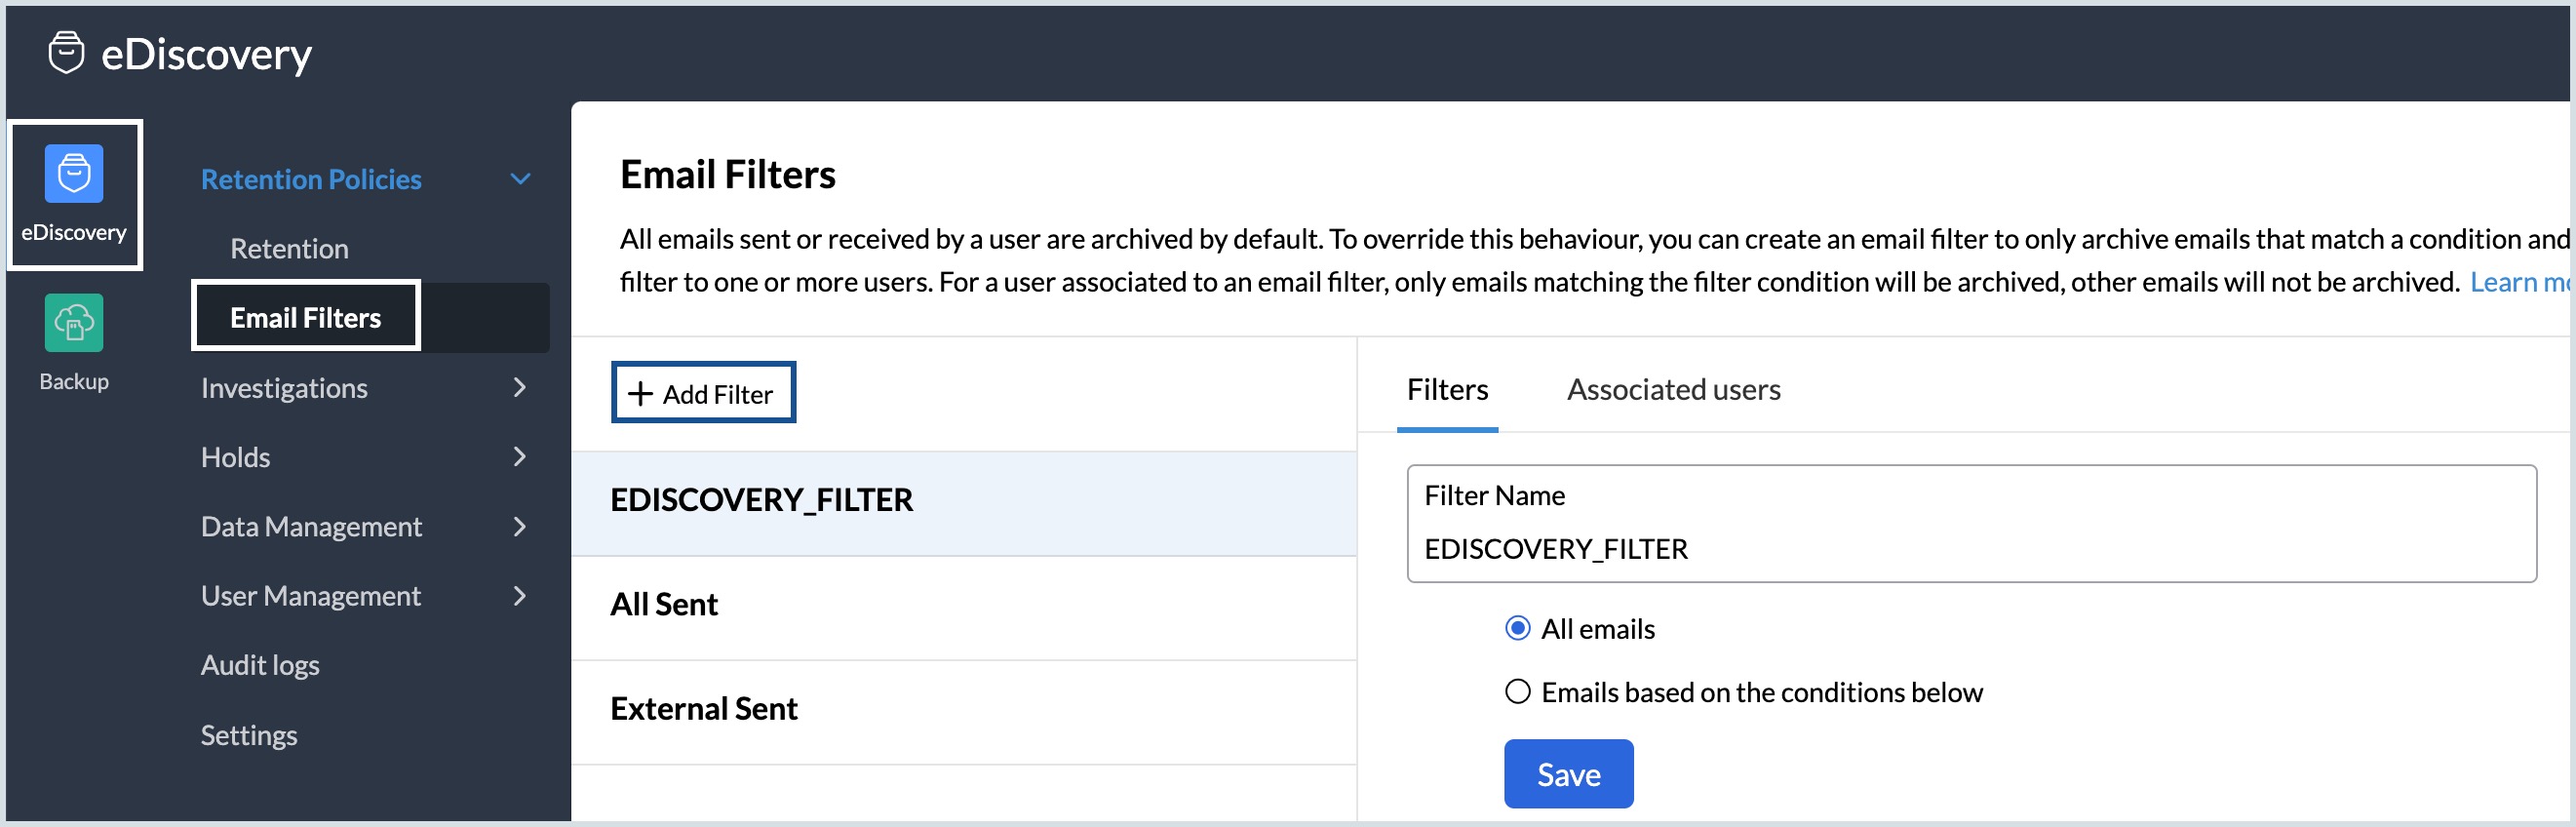 eDiscovery email filter